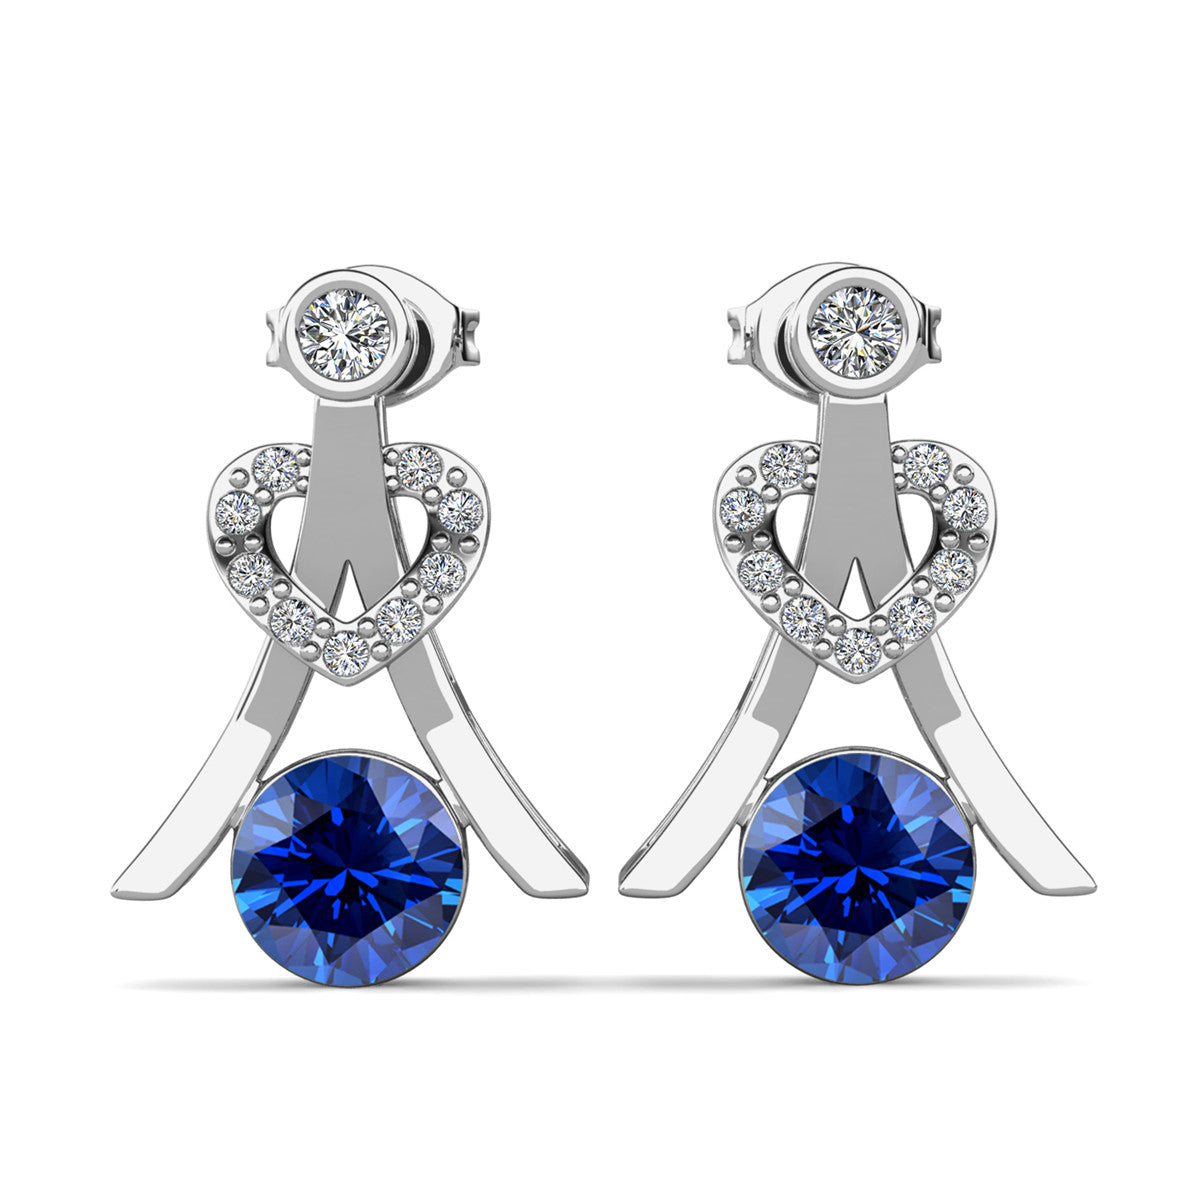 Serenity September Birthstone Sapphire Earrings, 18k White Gold Plated Silver Earrings with Round Cut Crystals